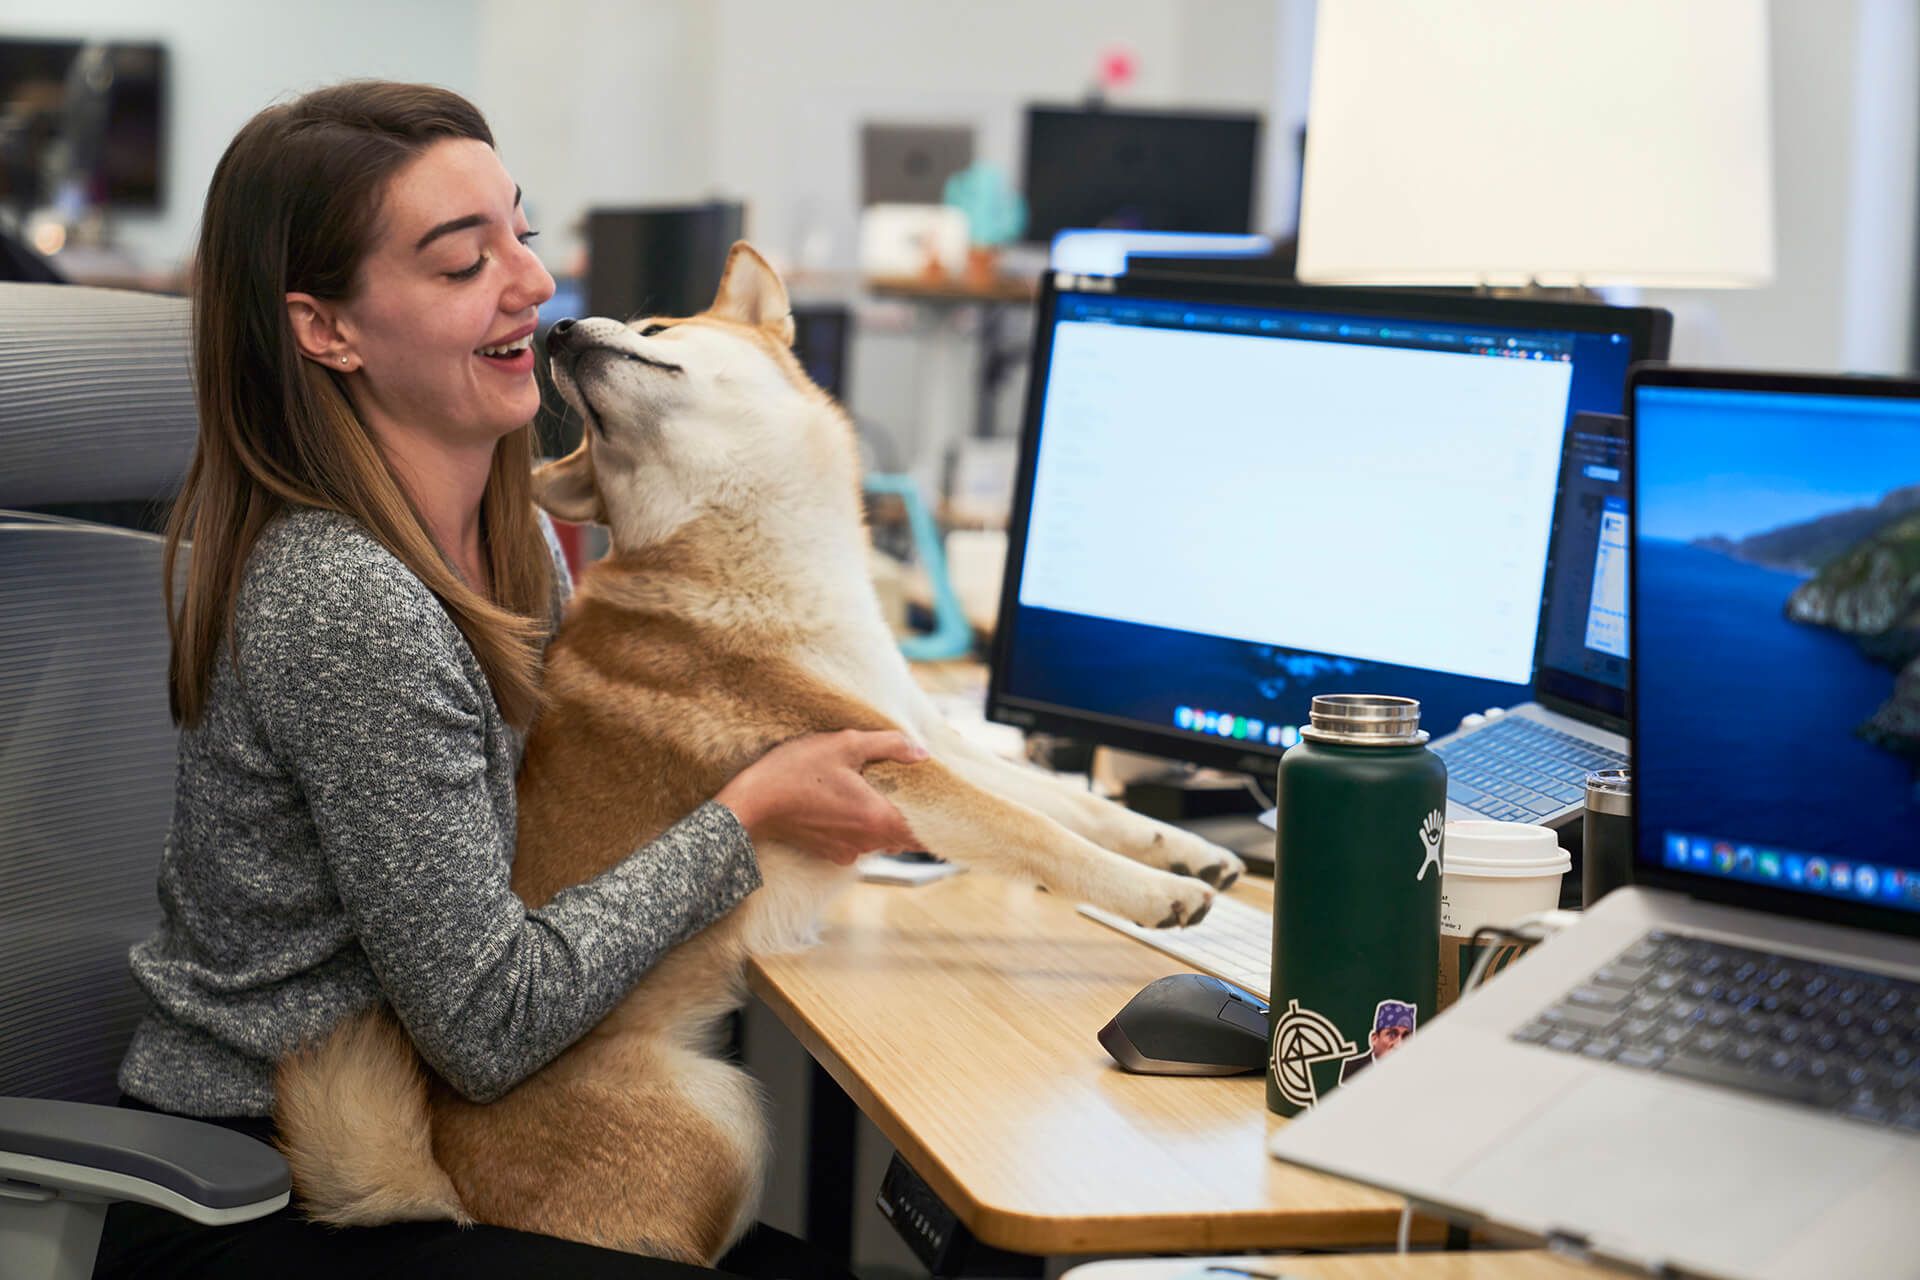 A Hologram employee enjoys a kiss from a Shiba Inu at her desk